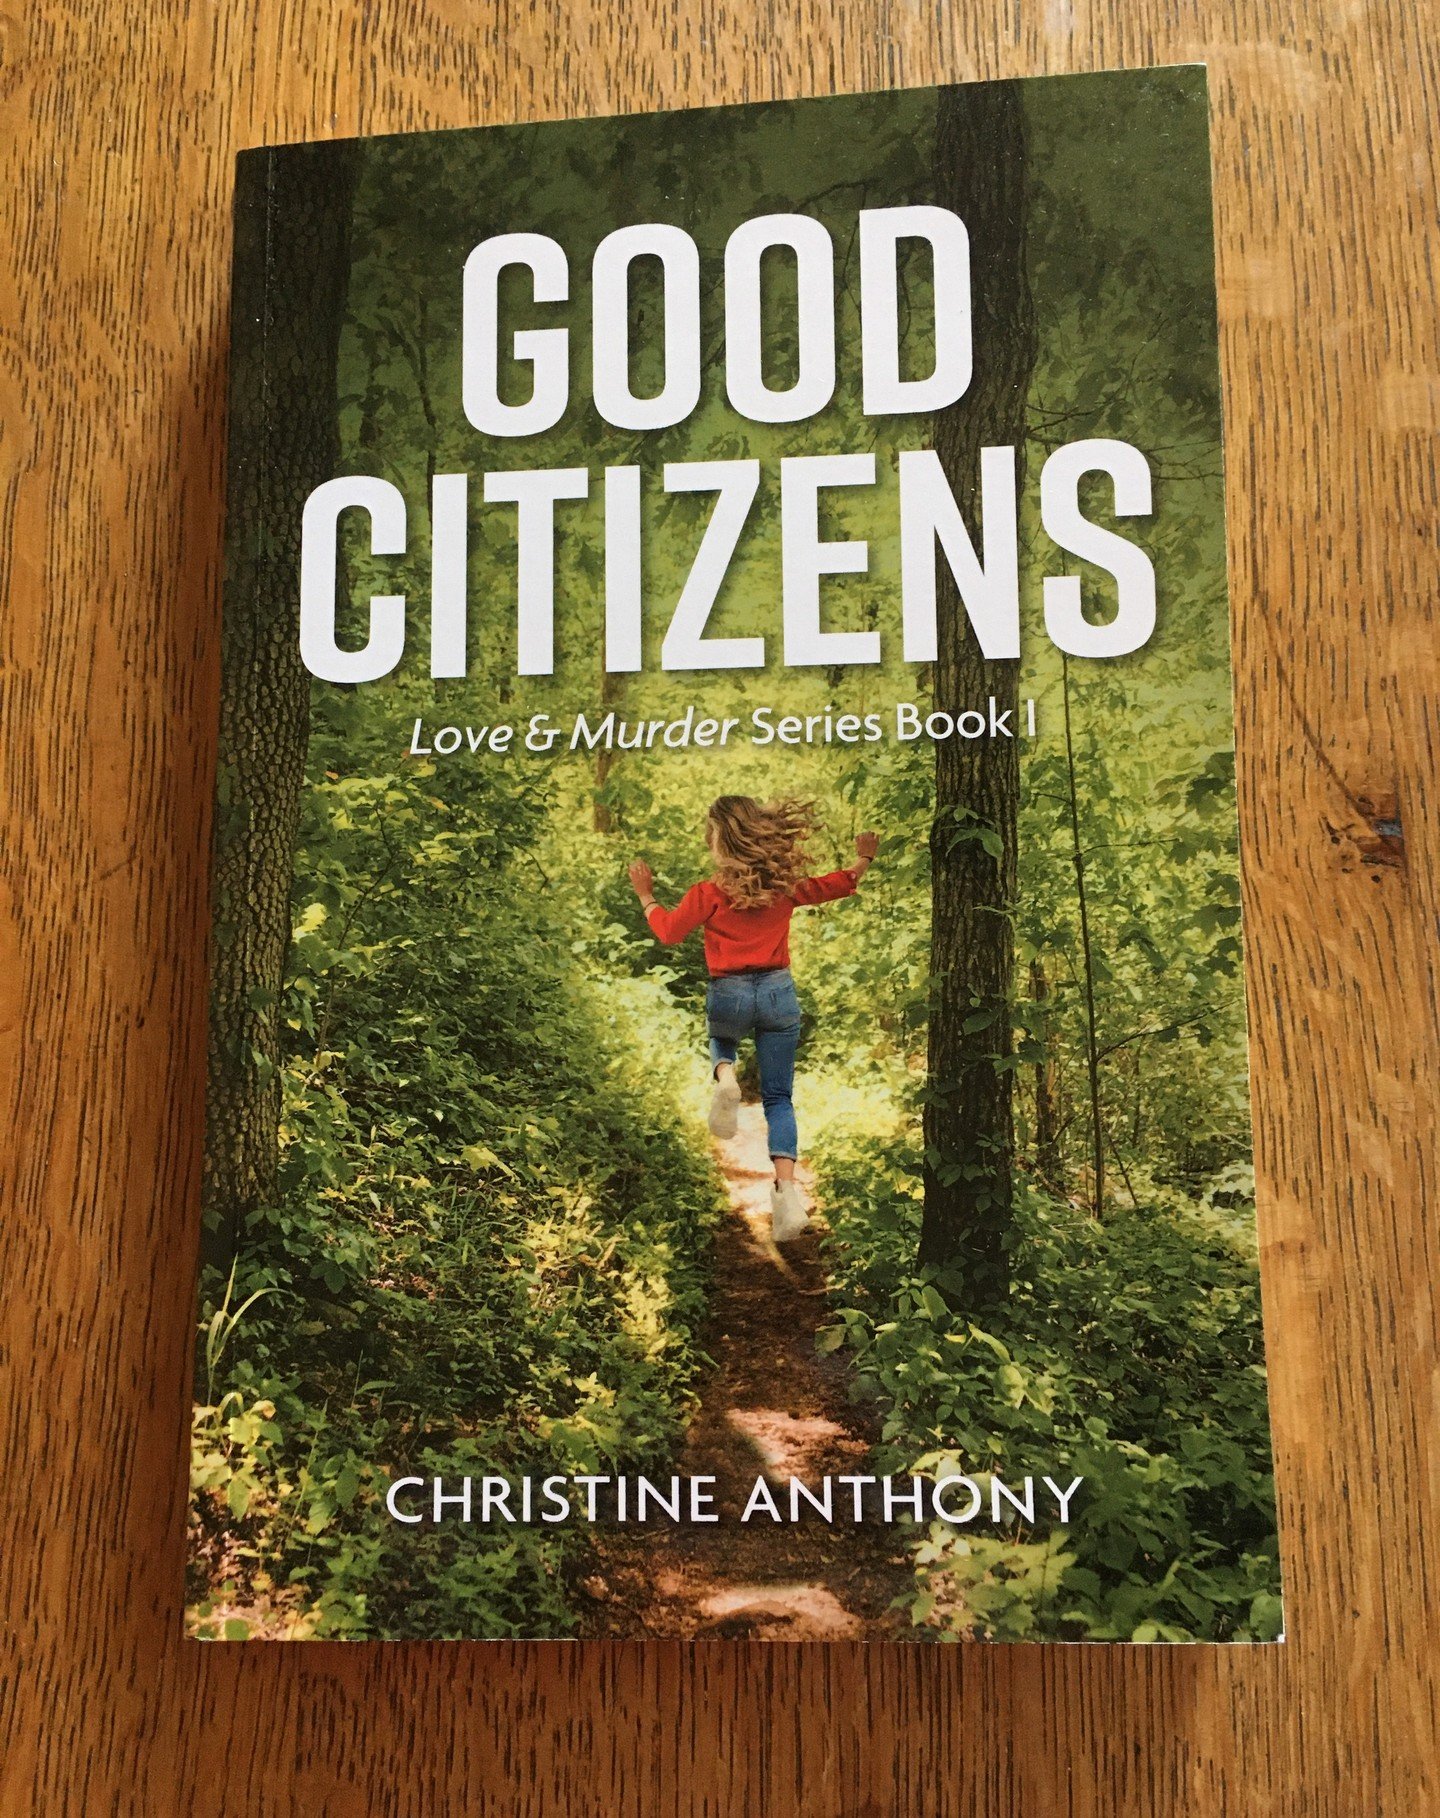 The cover for Good Citizens is ready! Good Citizens is book one in my Love &amp; Murder series. Available for pre-order soon! #newseries #newbook #romance #romanticsuspense #suspense #suspensenovel #romanticsuspensebook #reading #books #debutseries